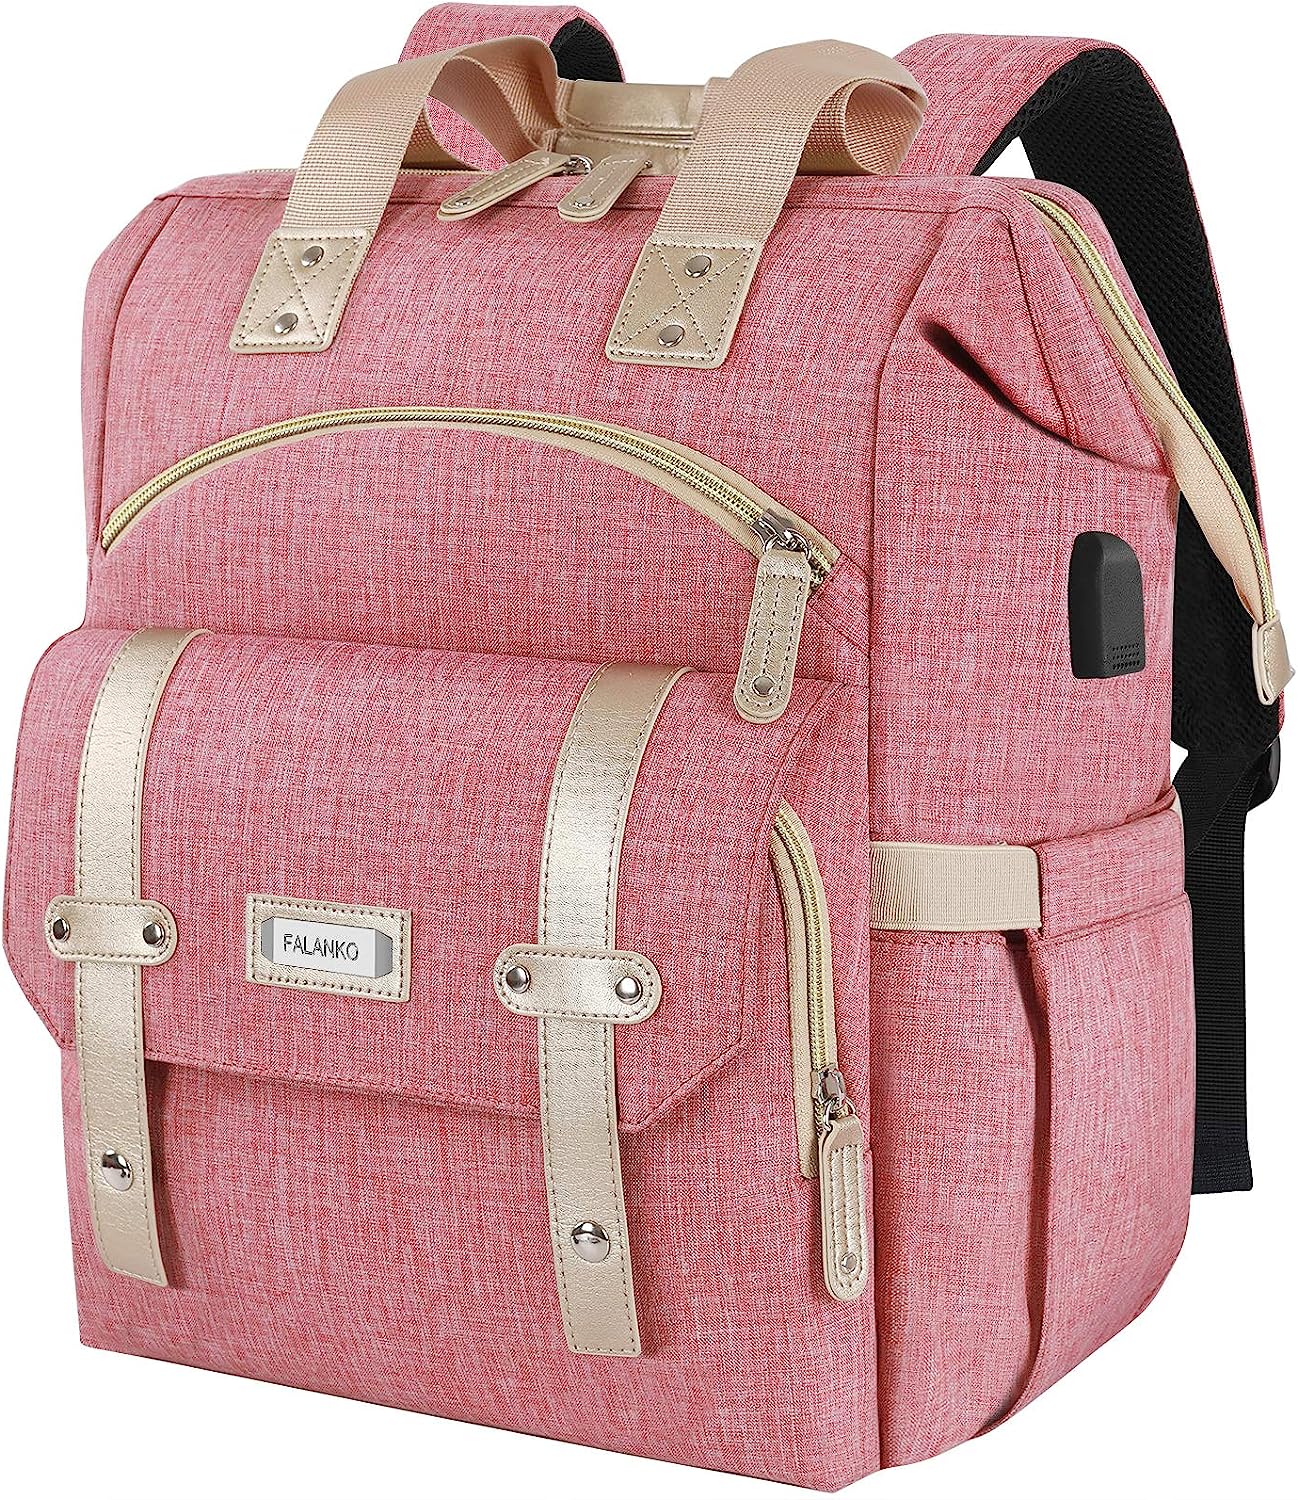 FALANKO Laptop Backpack for Women Review- the perfect solution to all your backpack woes.